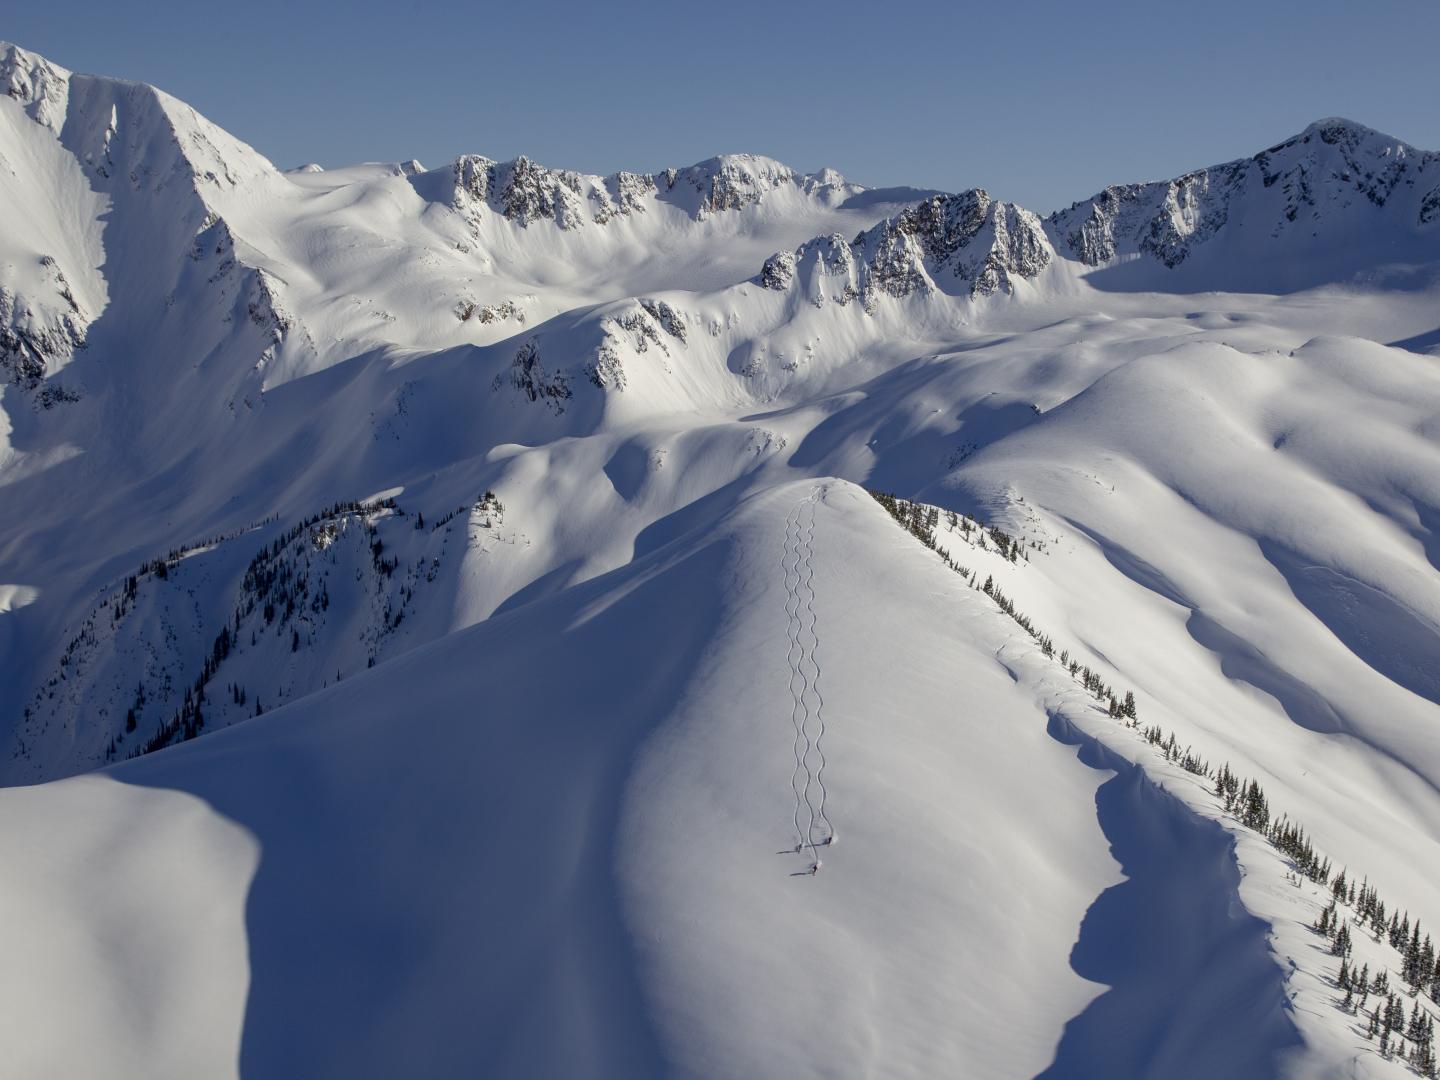 Heli-skiing – the coolest snow adventure in Canada